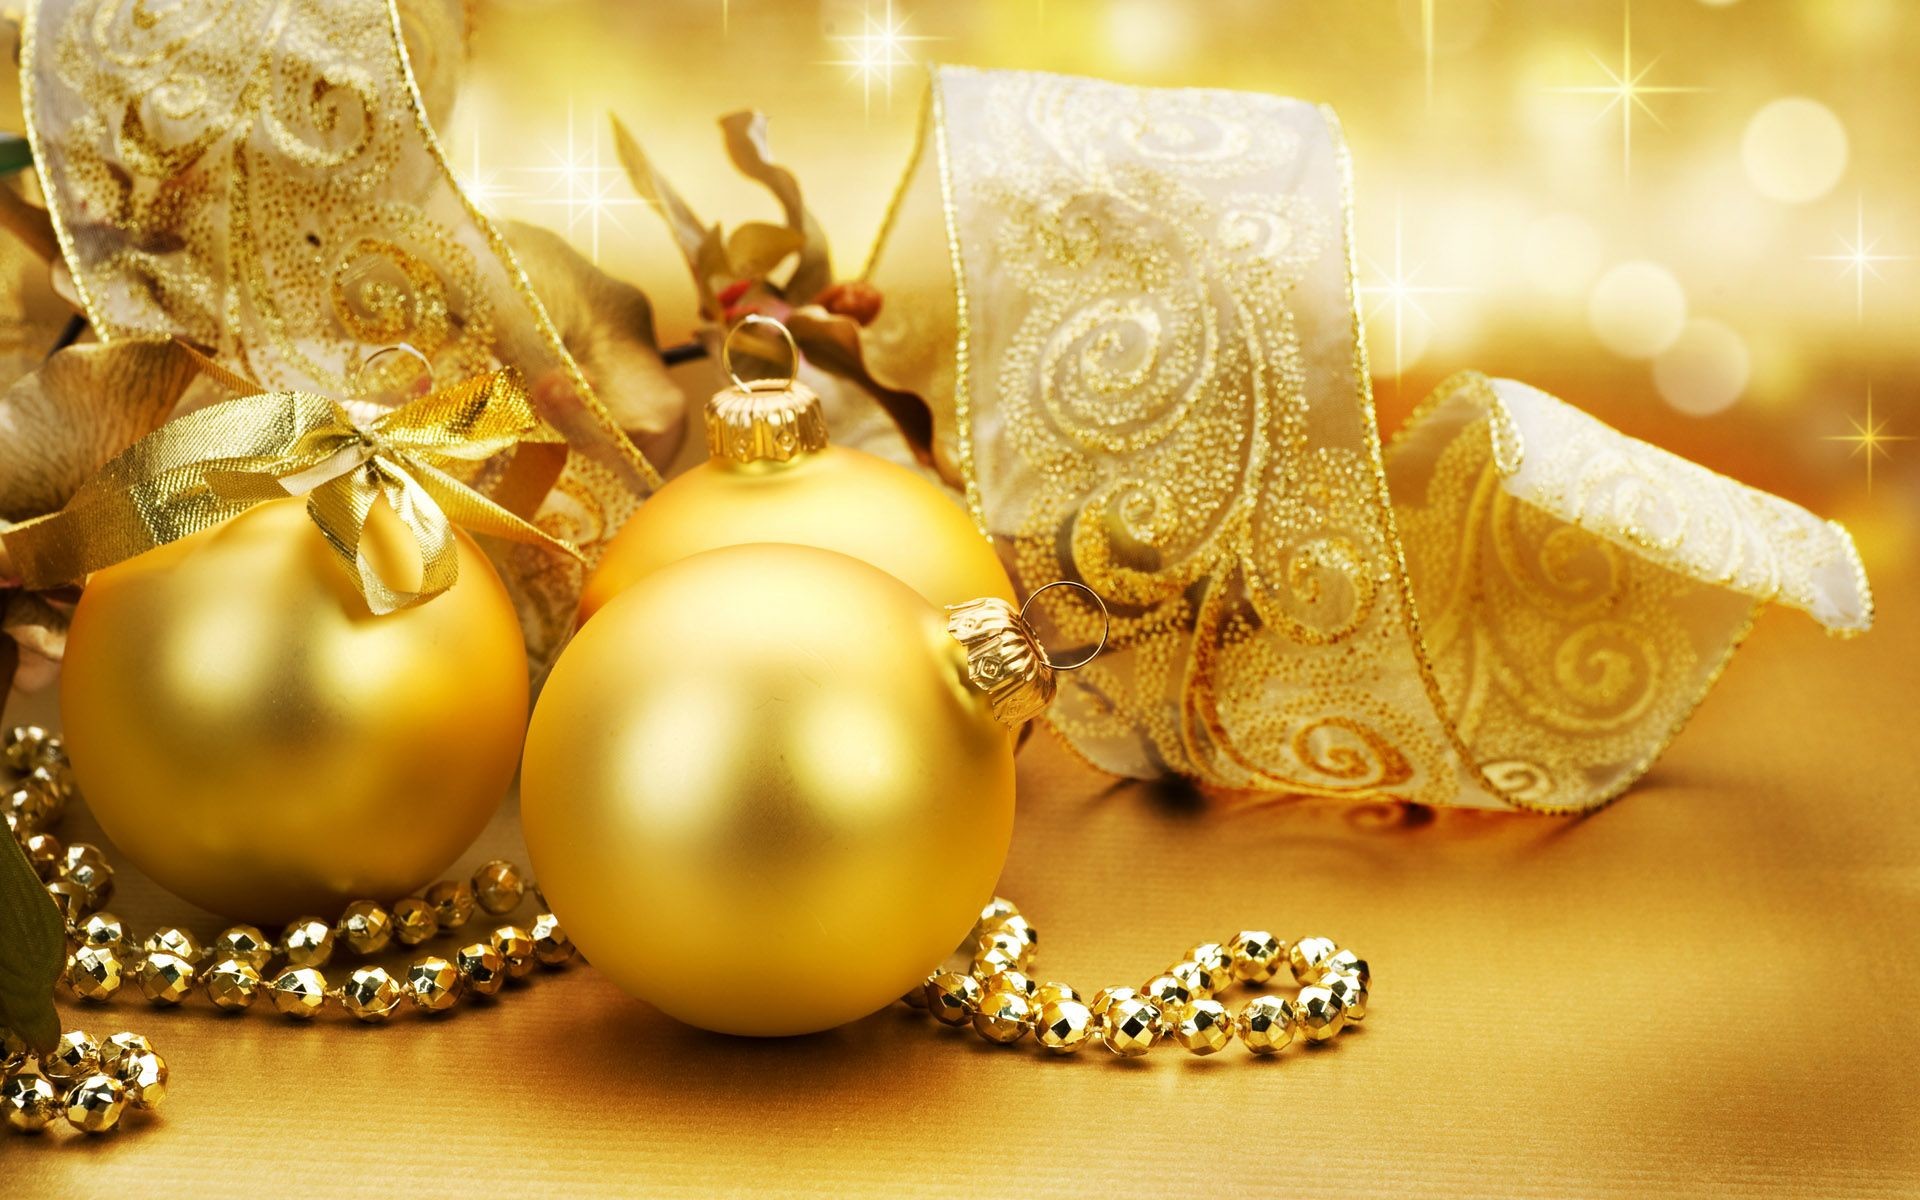 1920x1200 gold fantasy balls | Gold ornaments on the Christmas tree wallpapers and  images - download .